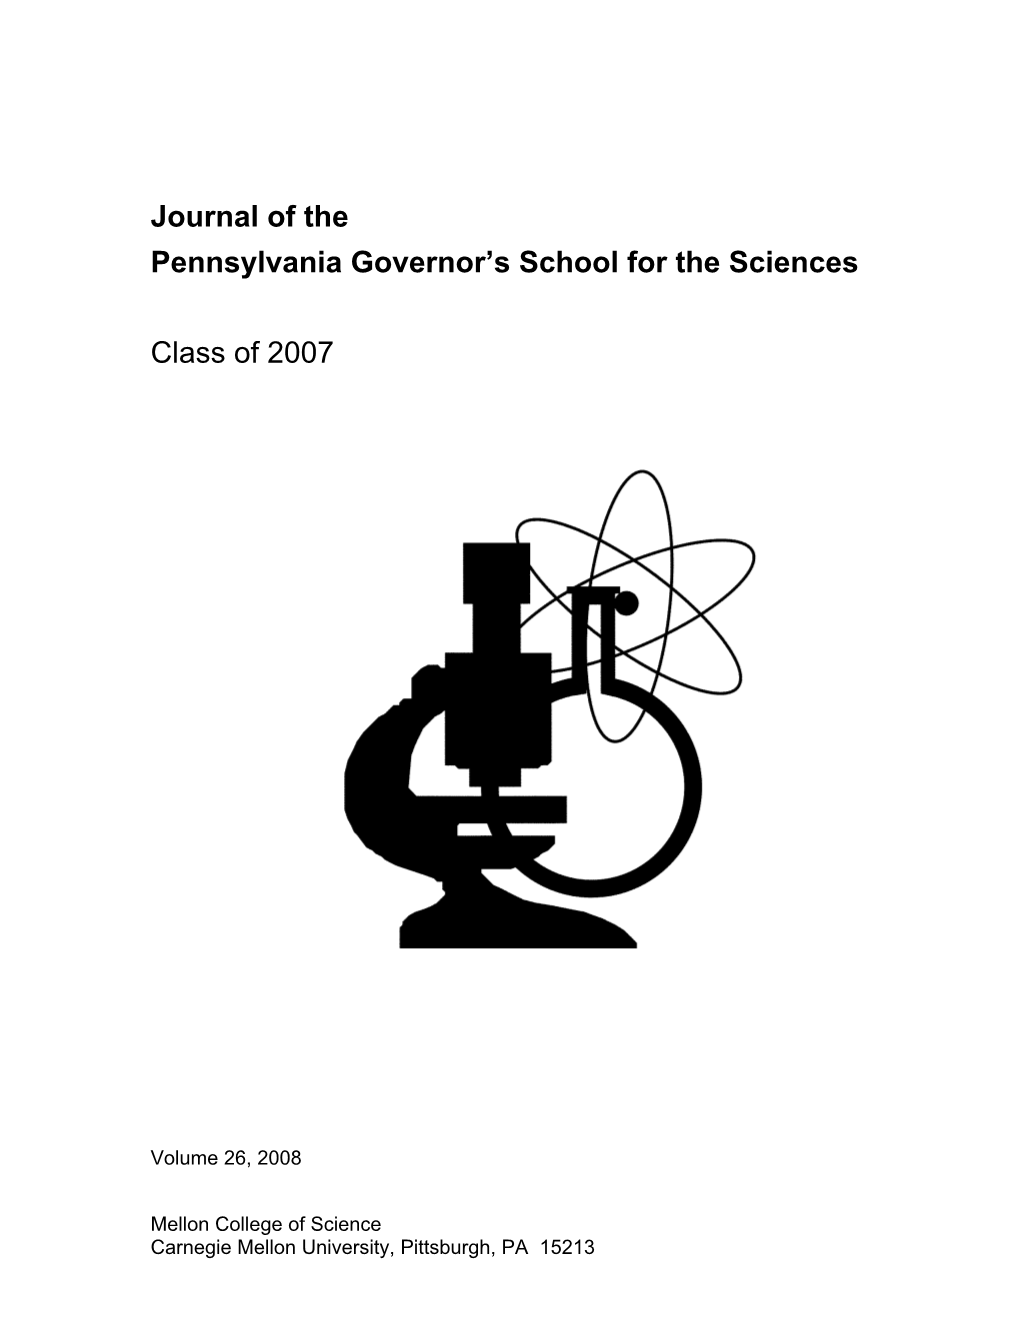 Journal of the Pennsylvania Governor's School for the Sciences